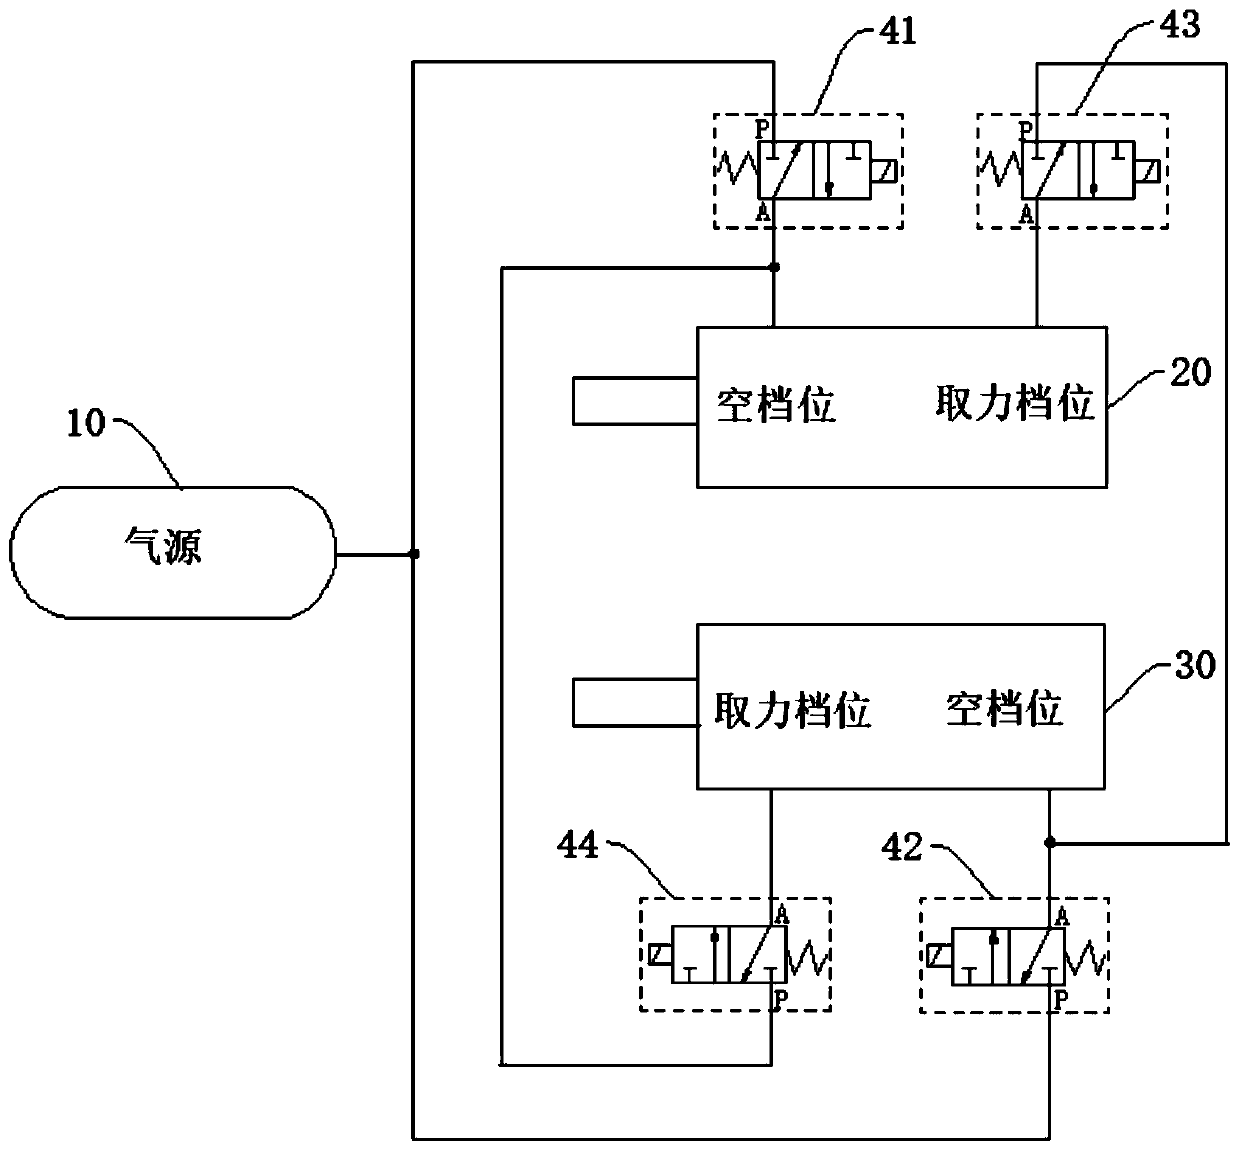 Boarding power take-off control system, method and engineering machinery